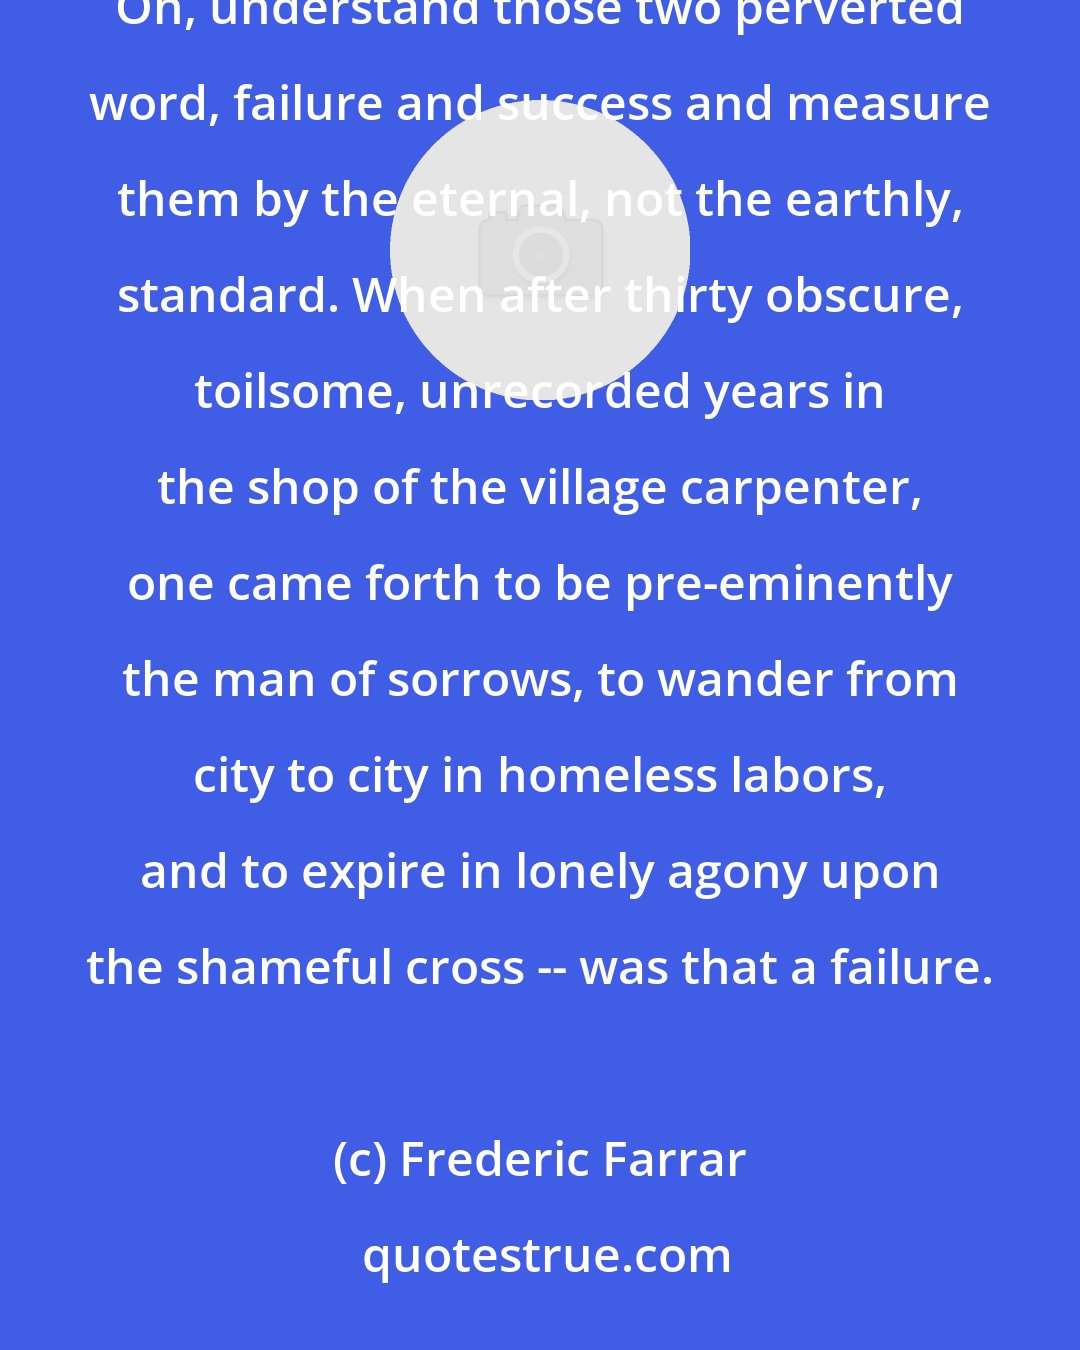 Frederic Farrar: No true work since the world began was ever wasted; no true life since the world began has ever failed. Oh, understand those two perverted word, failure and success and measure them by the eternal, not the earthly, standard. When after thirty obscure, toilsome, unrecorded years in the shop of the village carpenter, one came forth to be pre-eminently the man of sorrows, to wander from city to city in homeless labors, and to expire in lonely agony upon the shameful cross -- was that a failure.